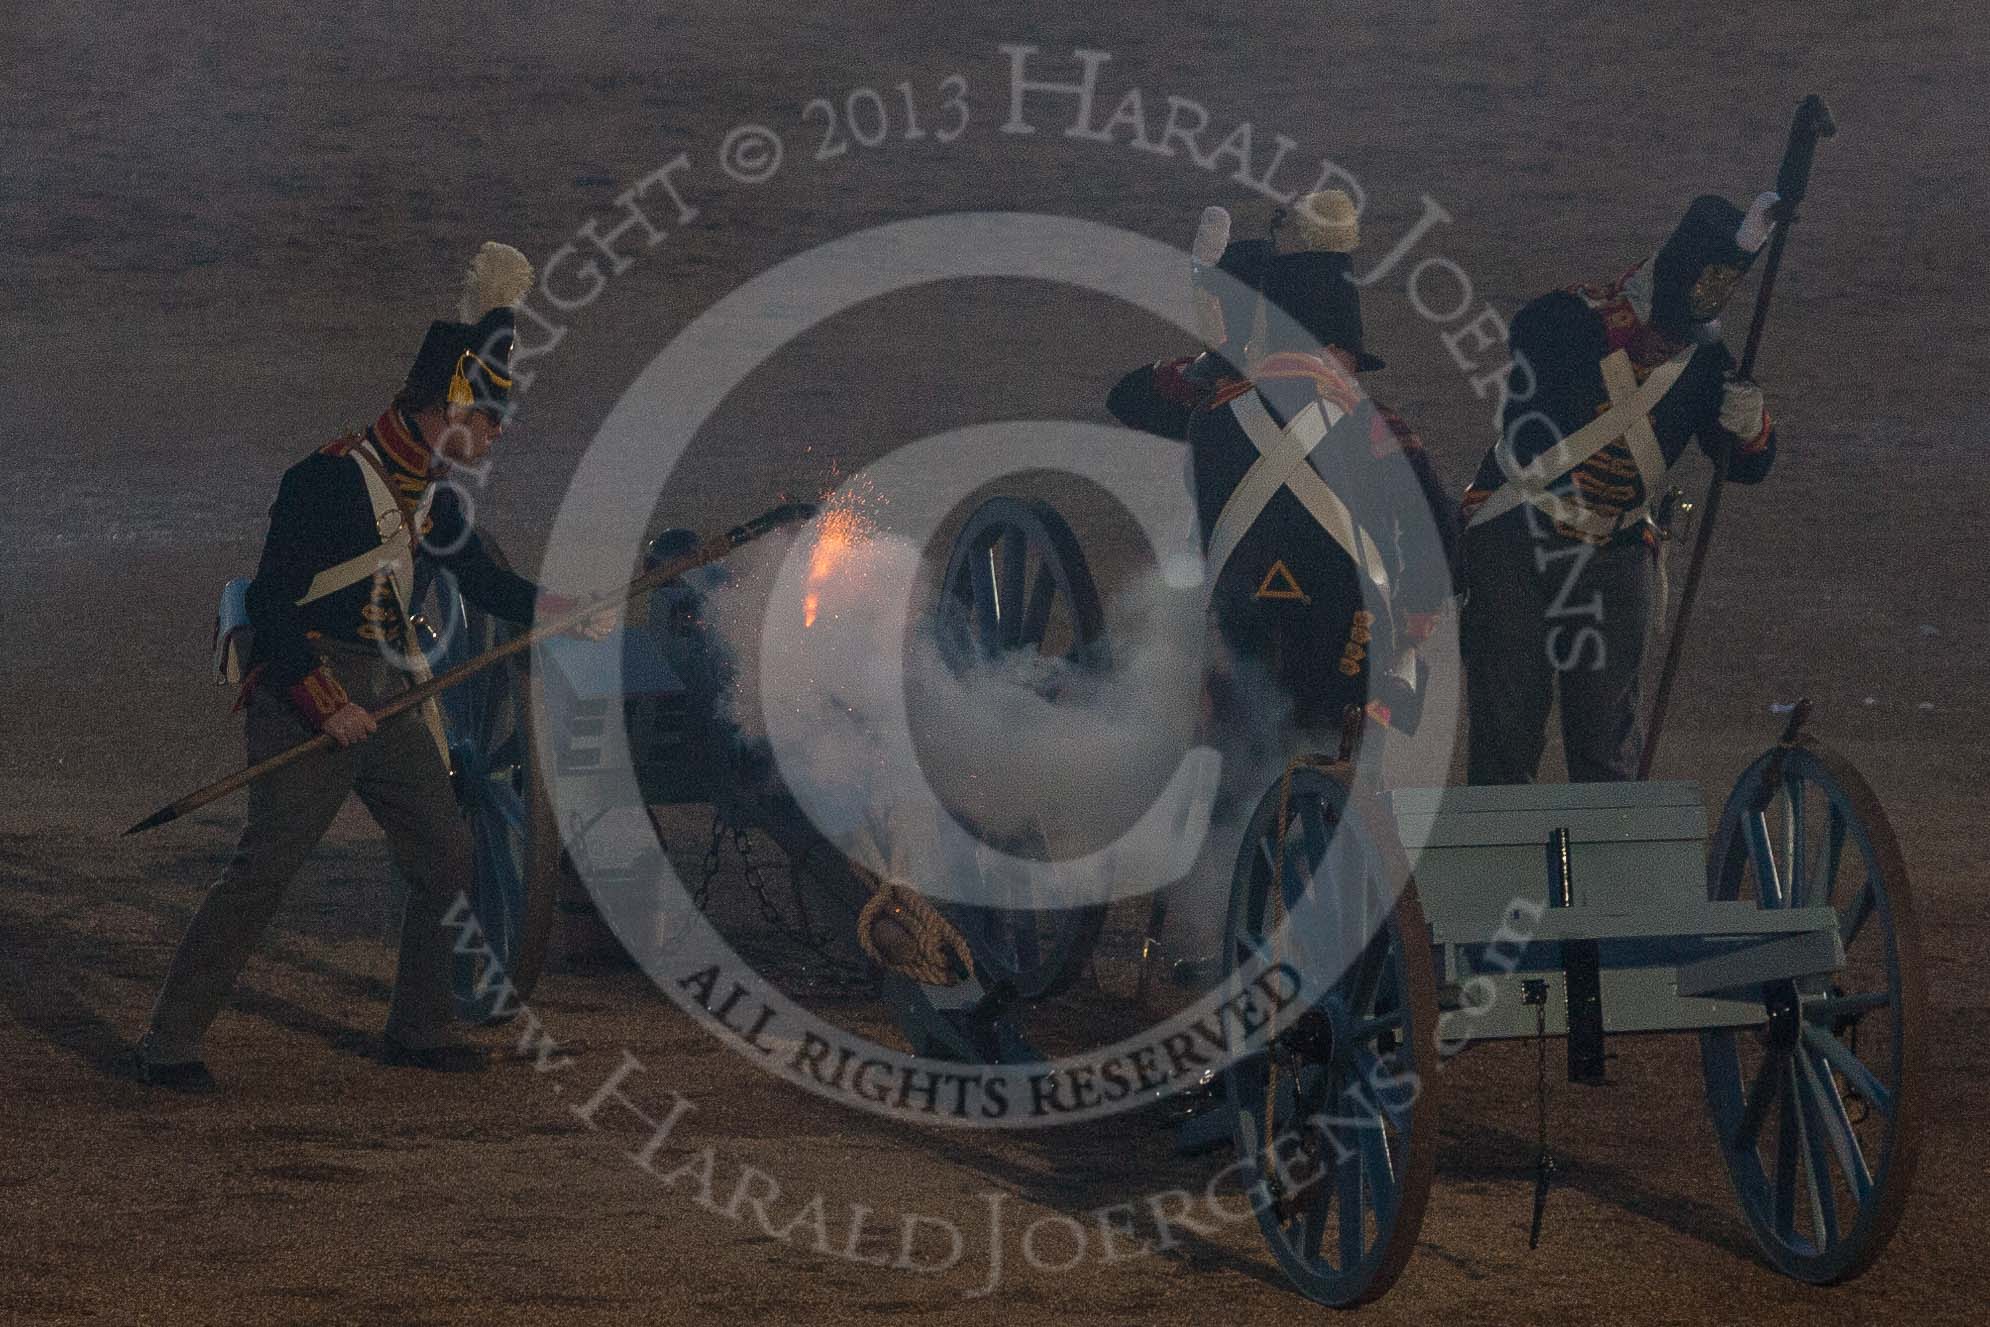 Beating Retreat 2015 - Waterloo 200.
Horse Guards Parade, Westminster,
London,

United Kingdom,
on 10 June 2015 at 21:27, image #337